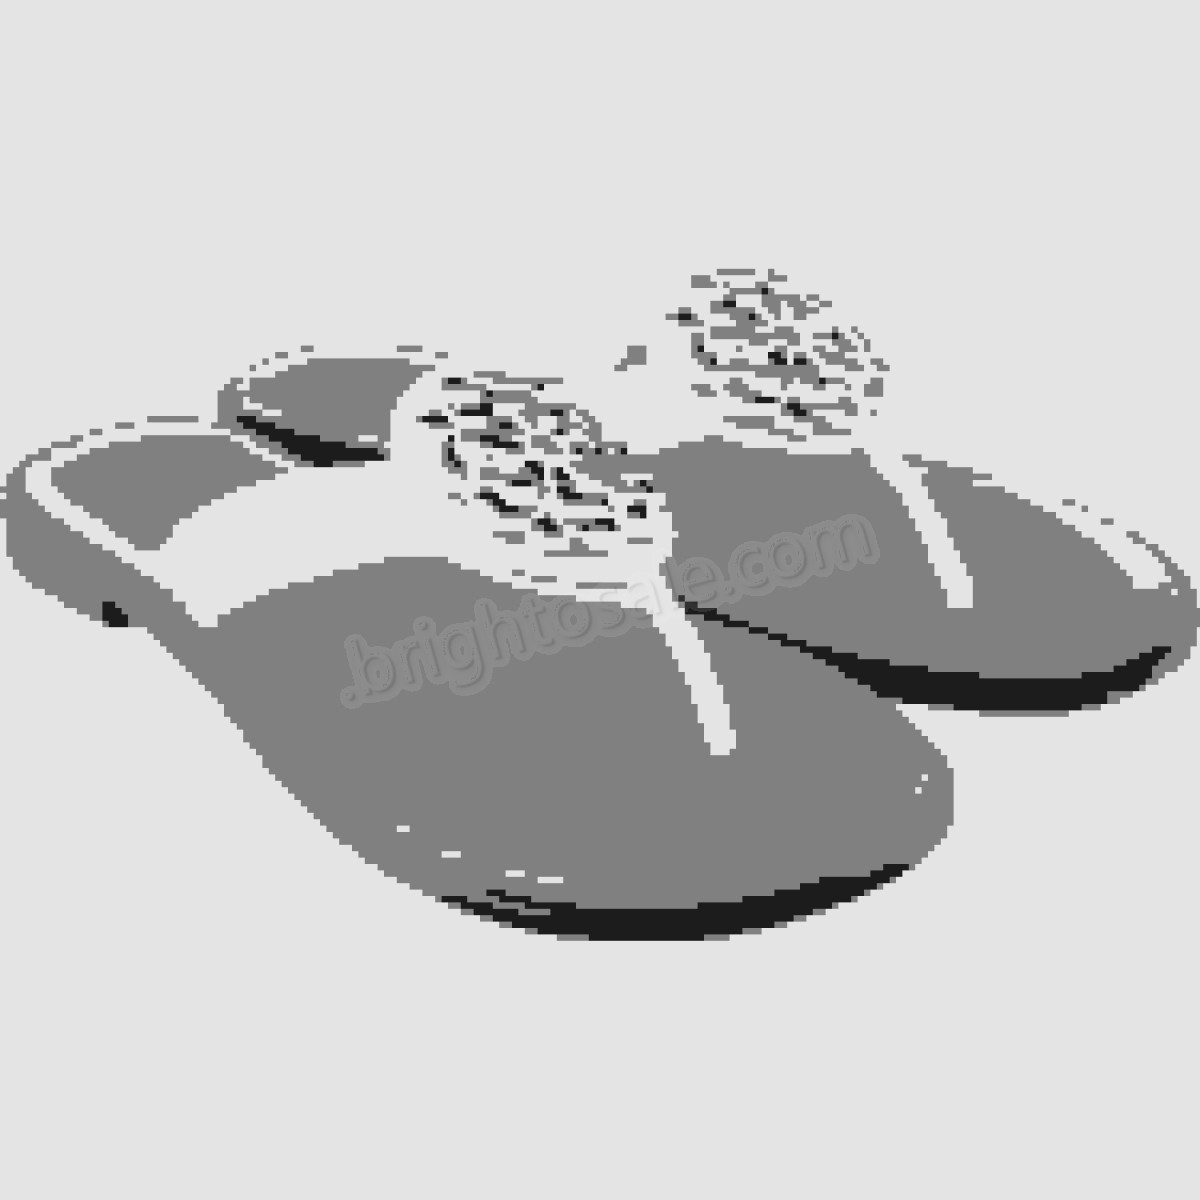 Brighton Collectibles & Online Discount Twine Woven Sandals - -18